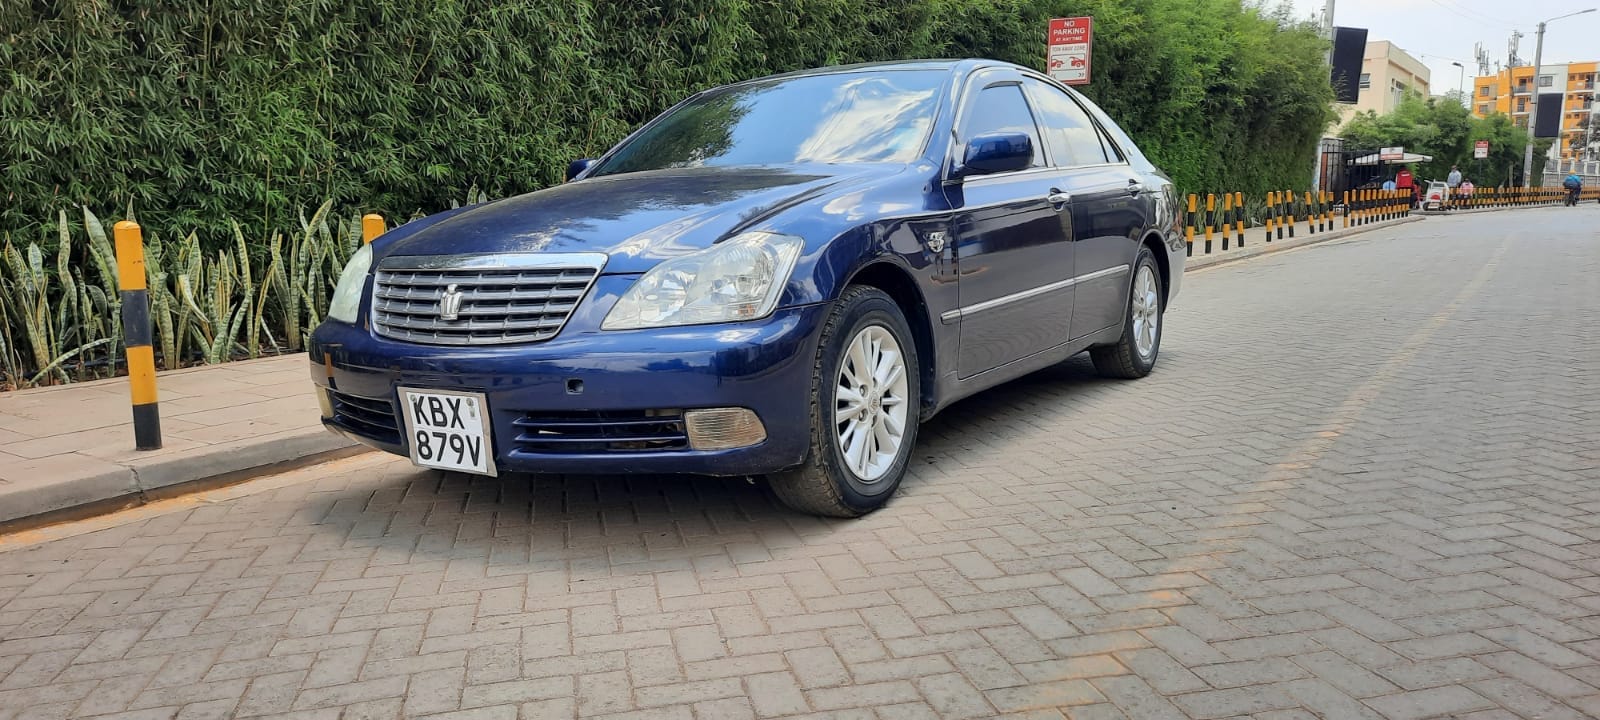 Toyota Crown 2006 pay 20% Balance in 60 Months OFFER